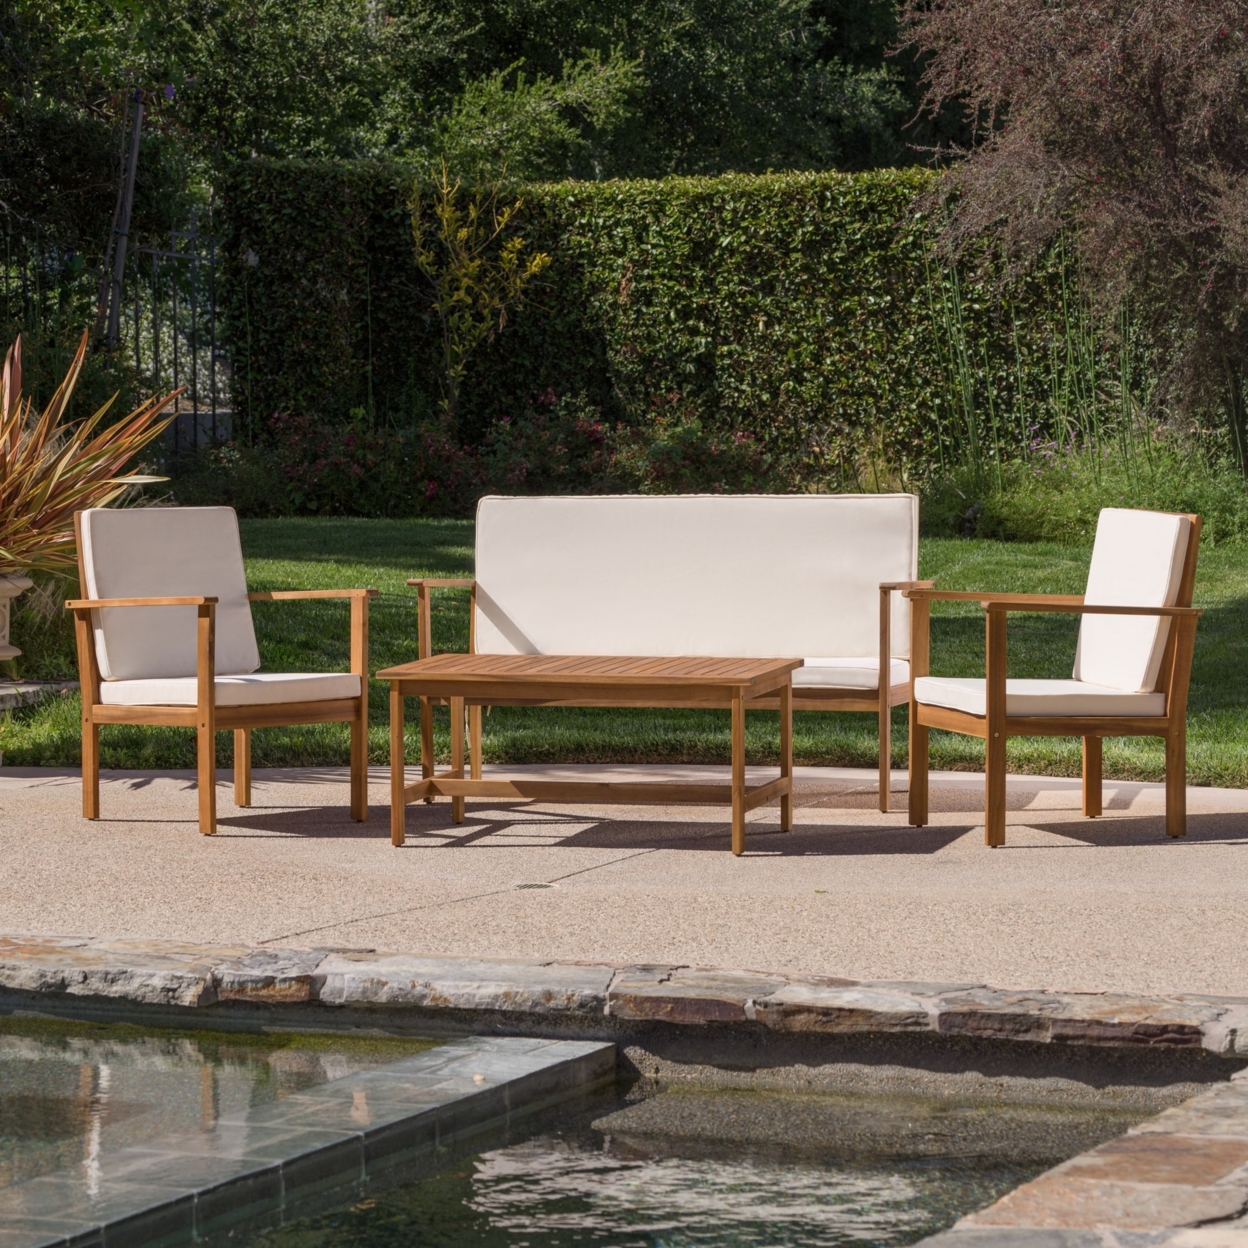 Luciano Outdoor Acacia Wood Chat Set With Water Resistant Cushions - Brown Patina, Cream